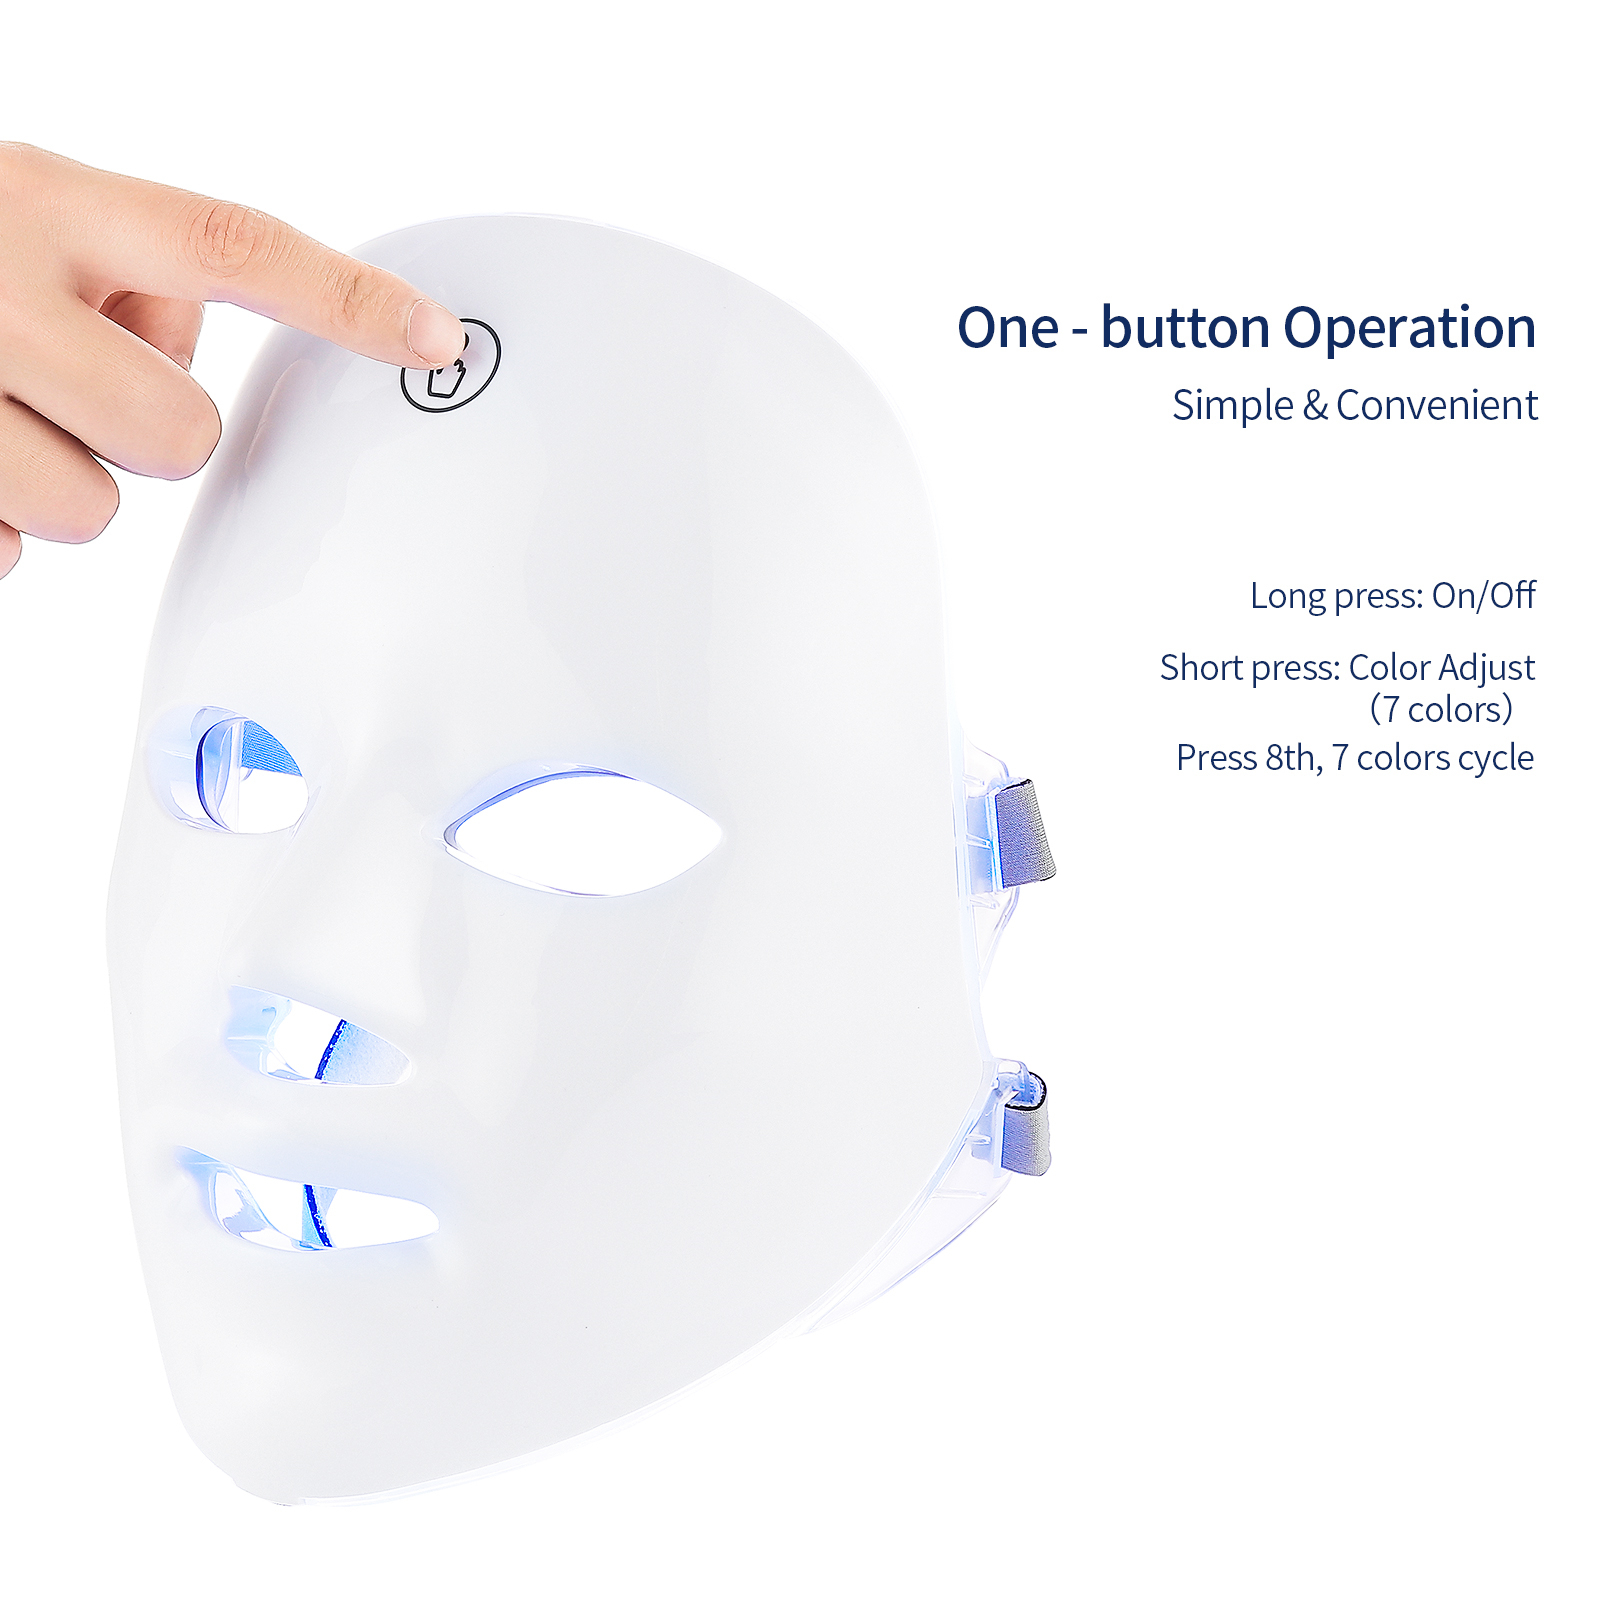 CREM™ LED 7 Functions Facial skincare Mask - Beauty And Sales